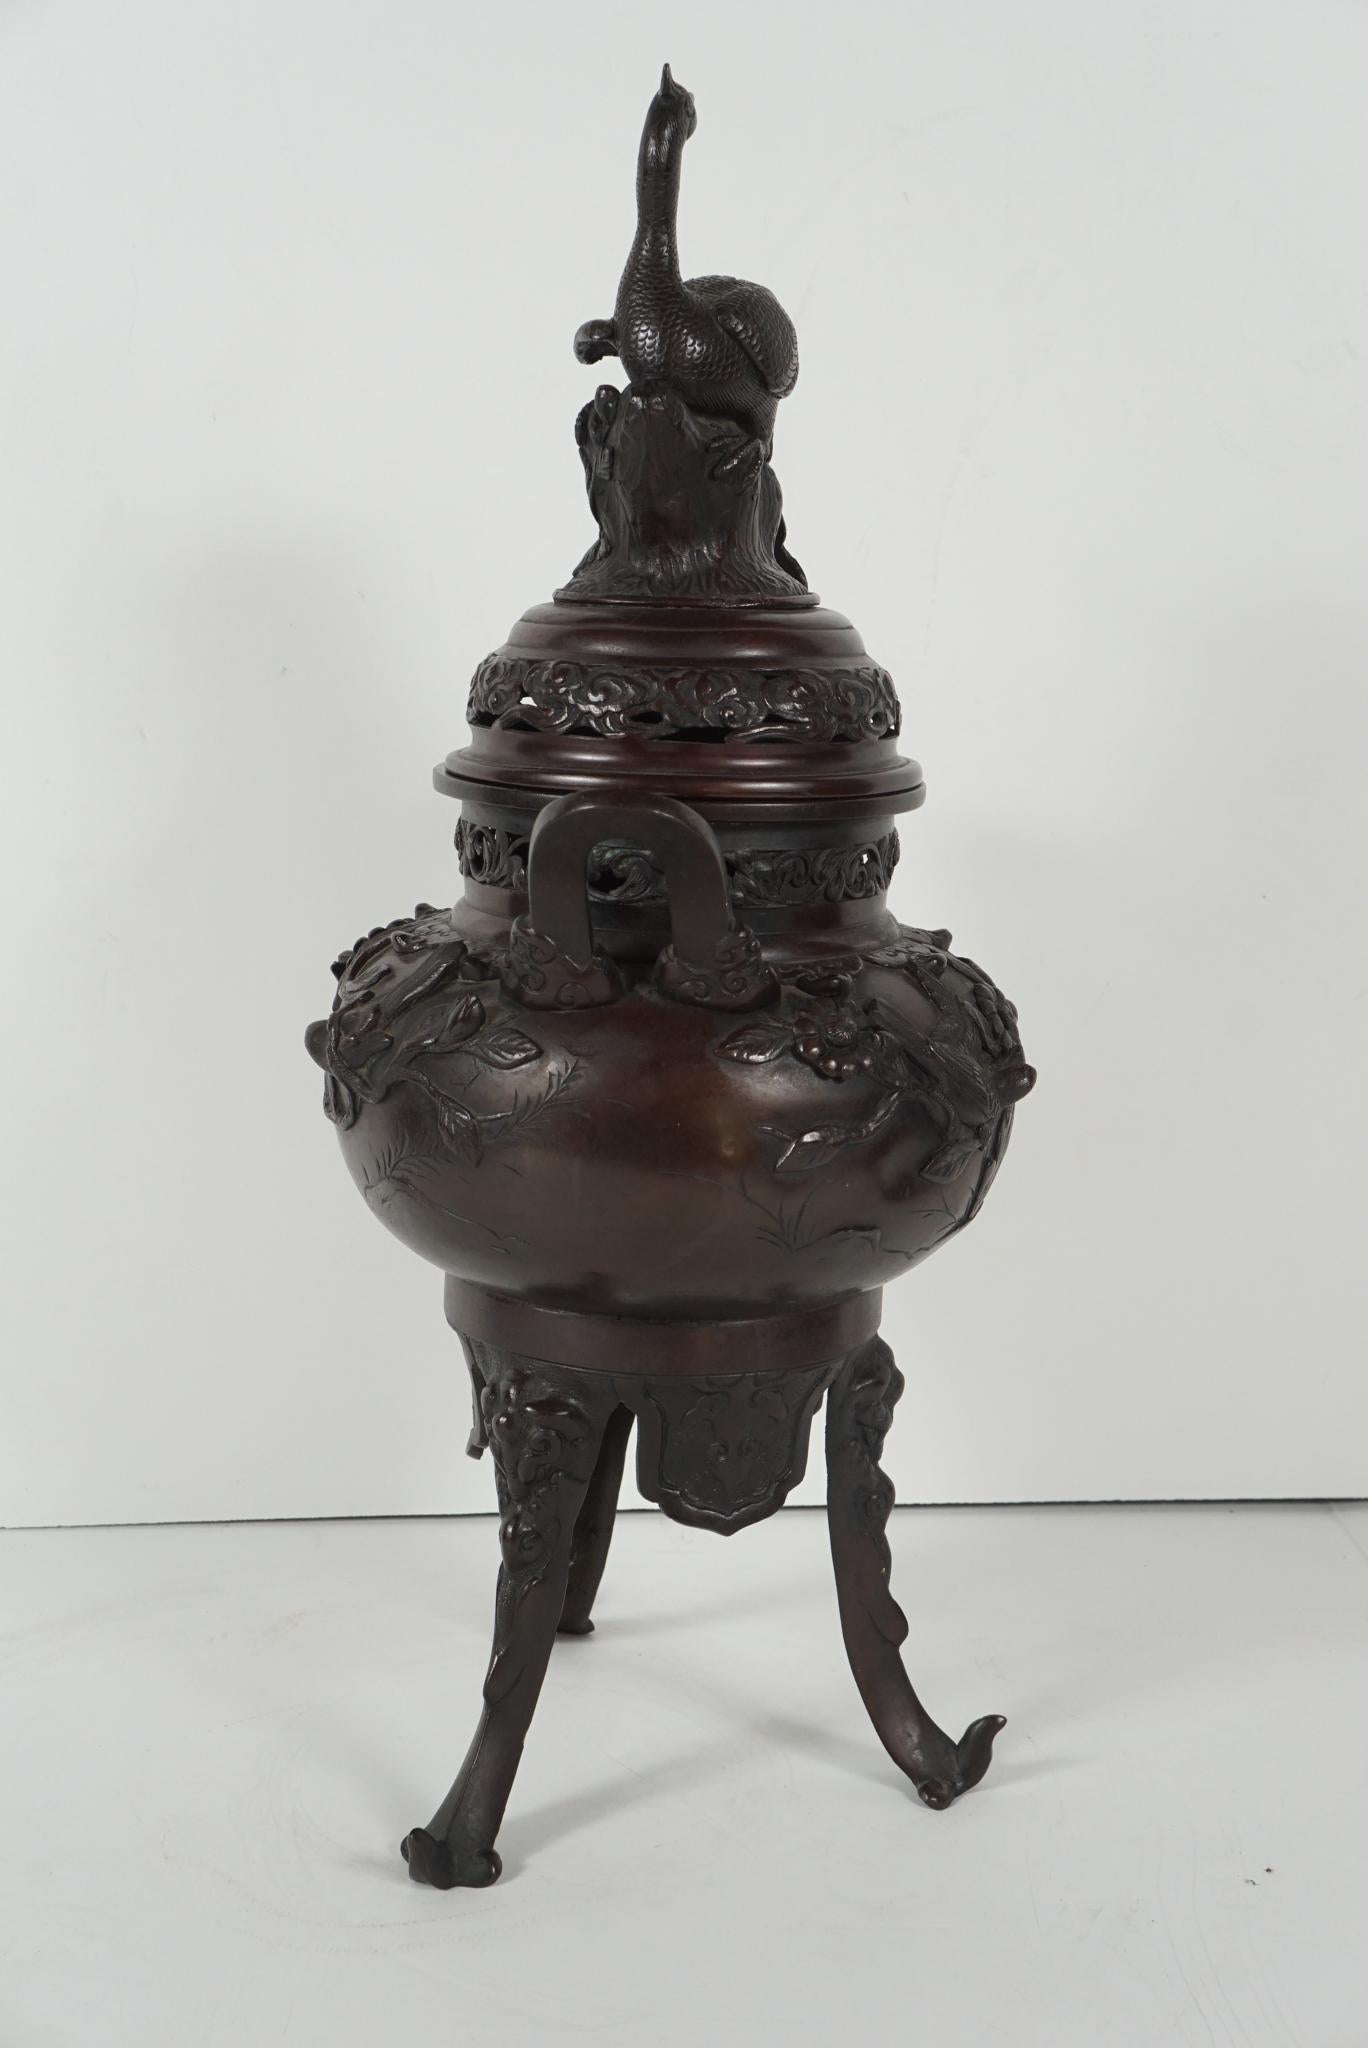 This large scale incense burner was made in the Meiji period in Japanese history. Cast between 1868 and 1900 the censer is topped with a phoenix resting on an open work cloud bordered lid. The body of the censer is cast with foliage, birds and